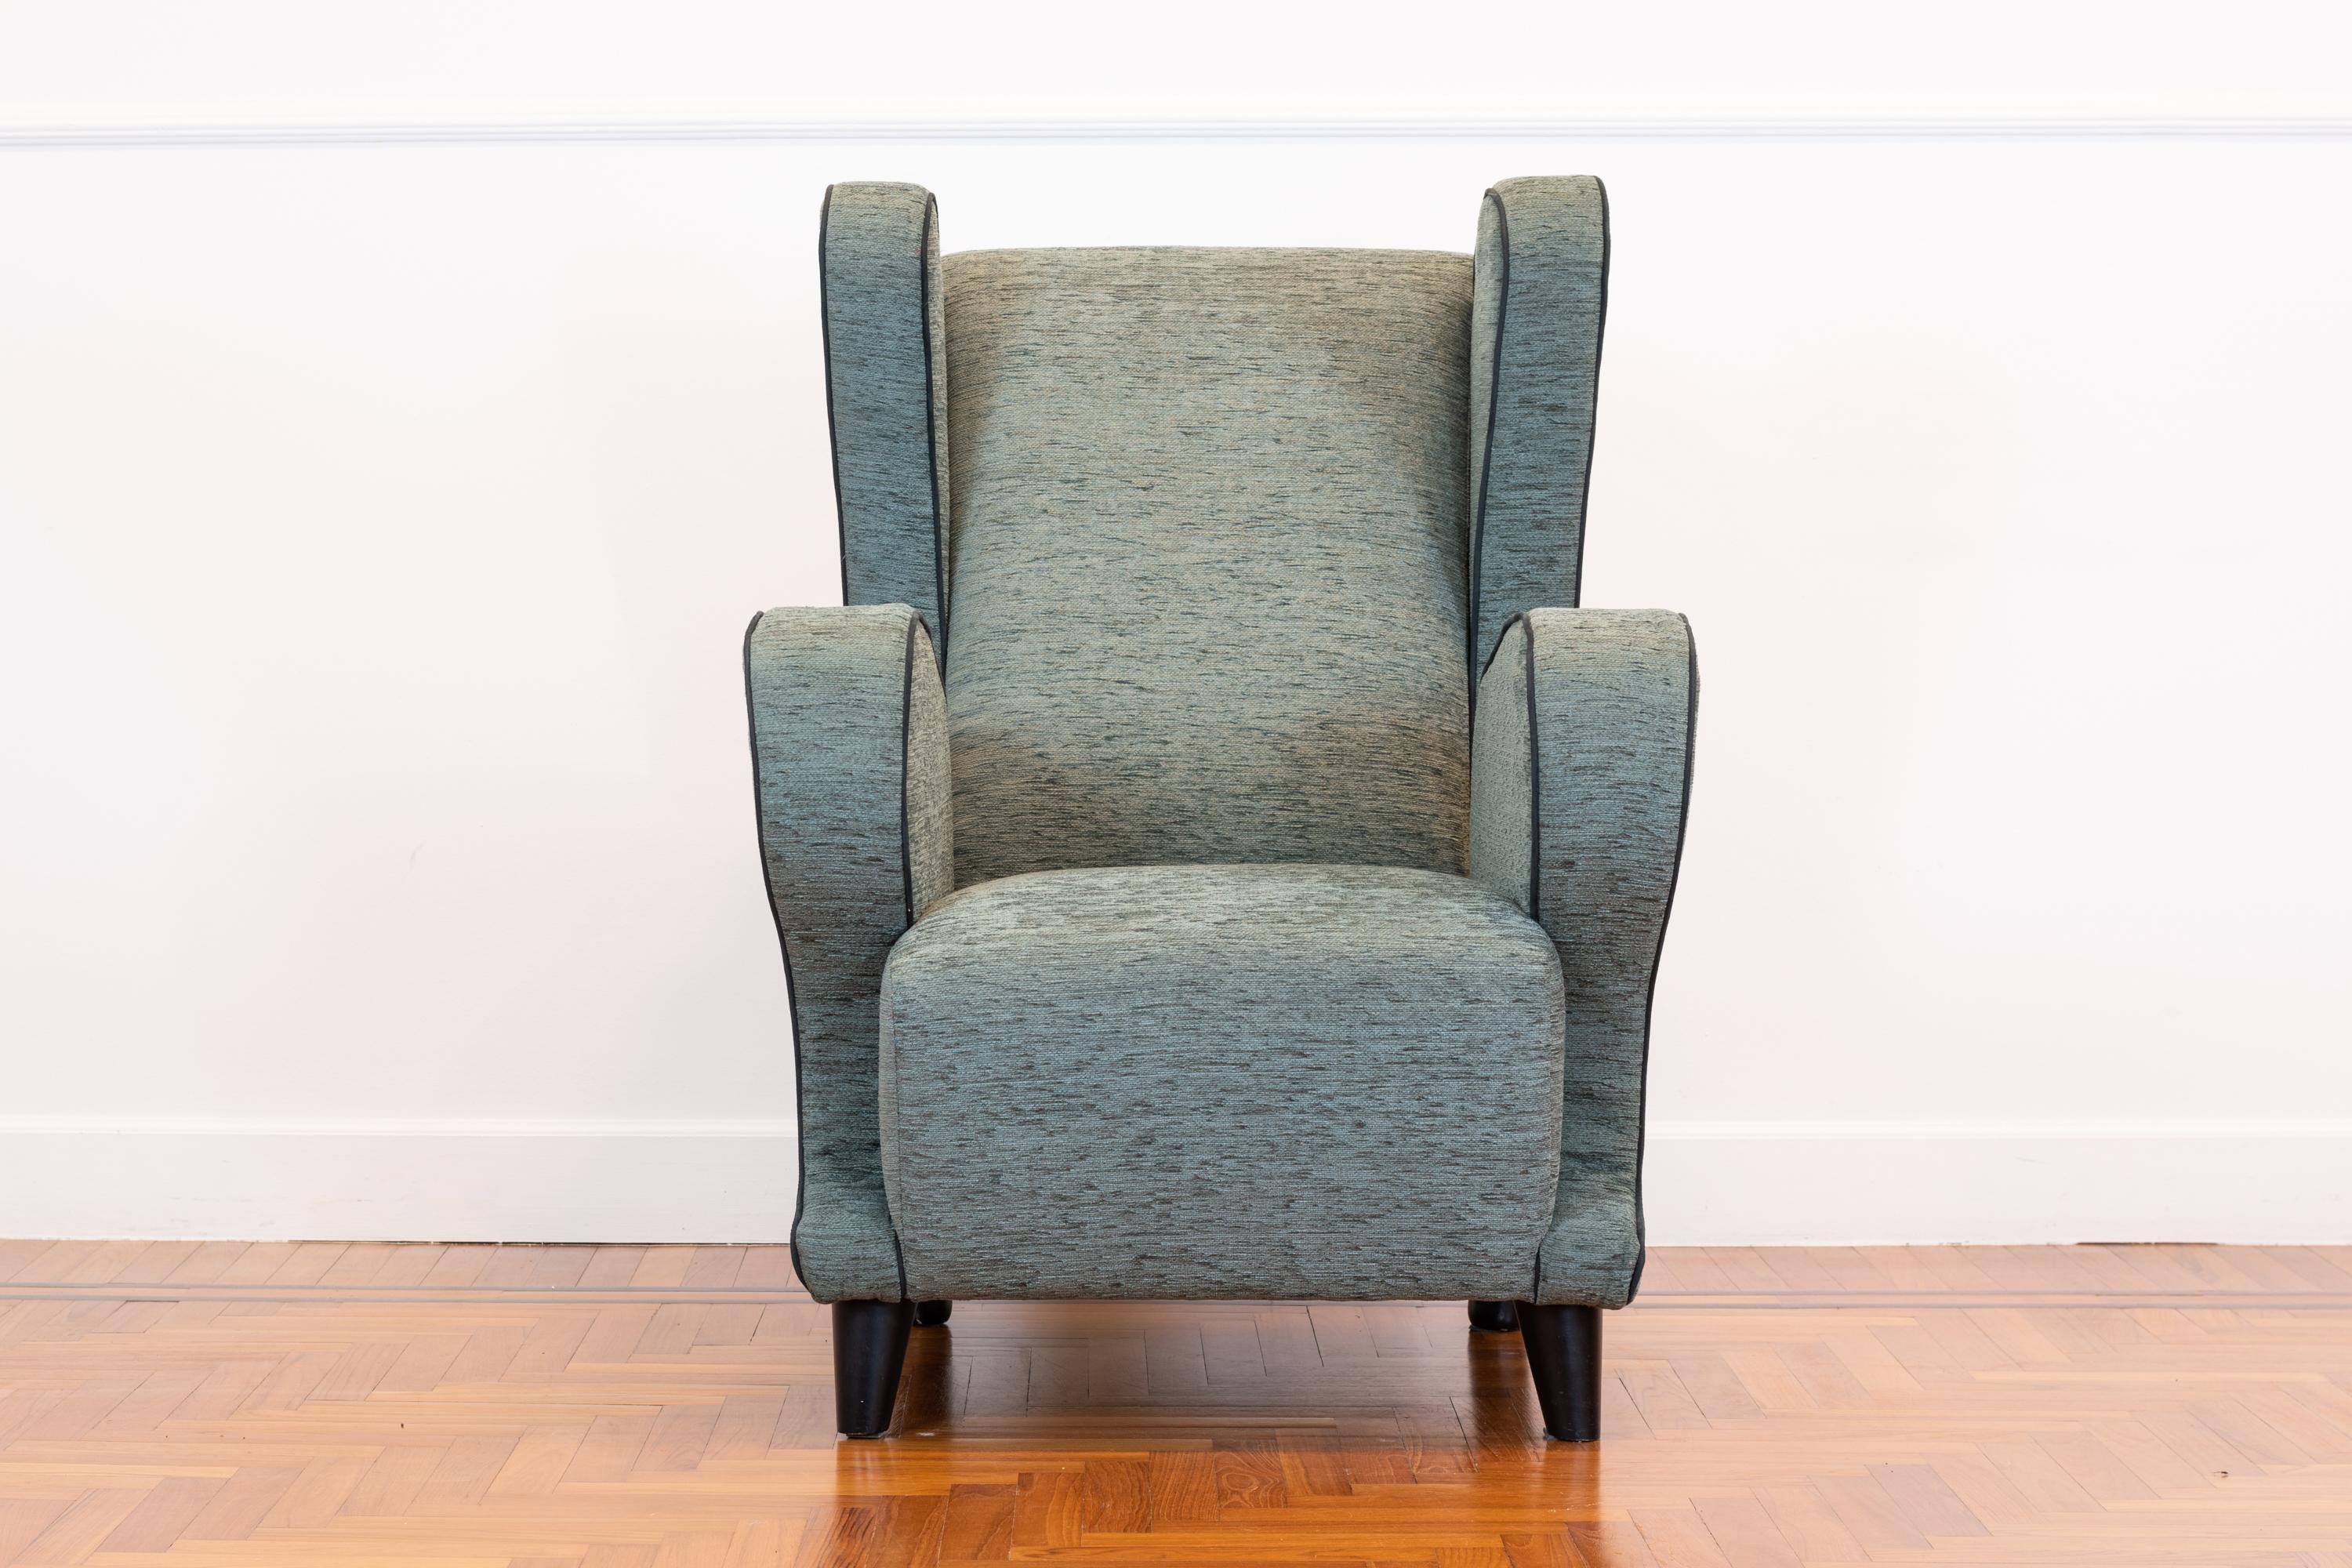 Midcentury style armchair designed by Melchiorre Bega in 1940s for Poltronova, Italy.
Armchair with lacquered wood structure and upholstered fabric in a nice grey shade.

 